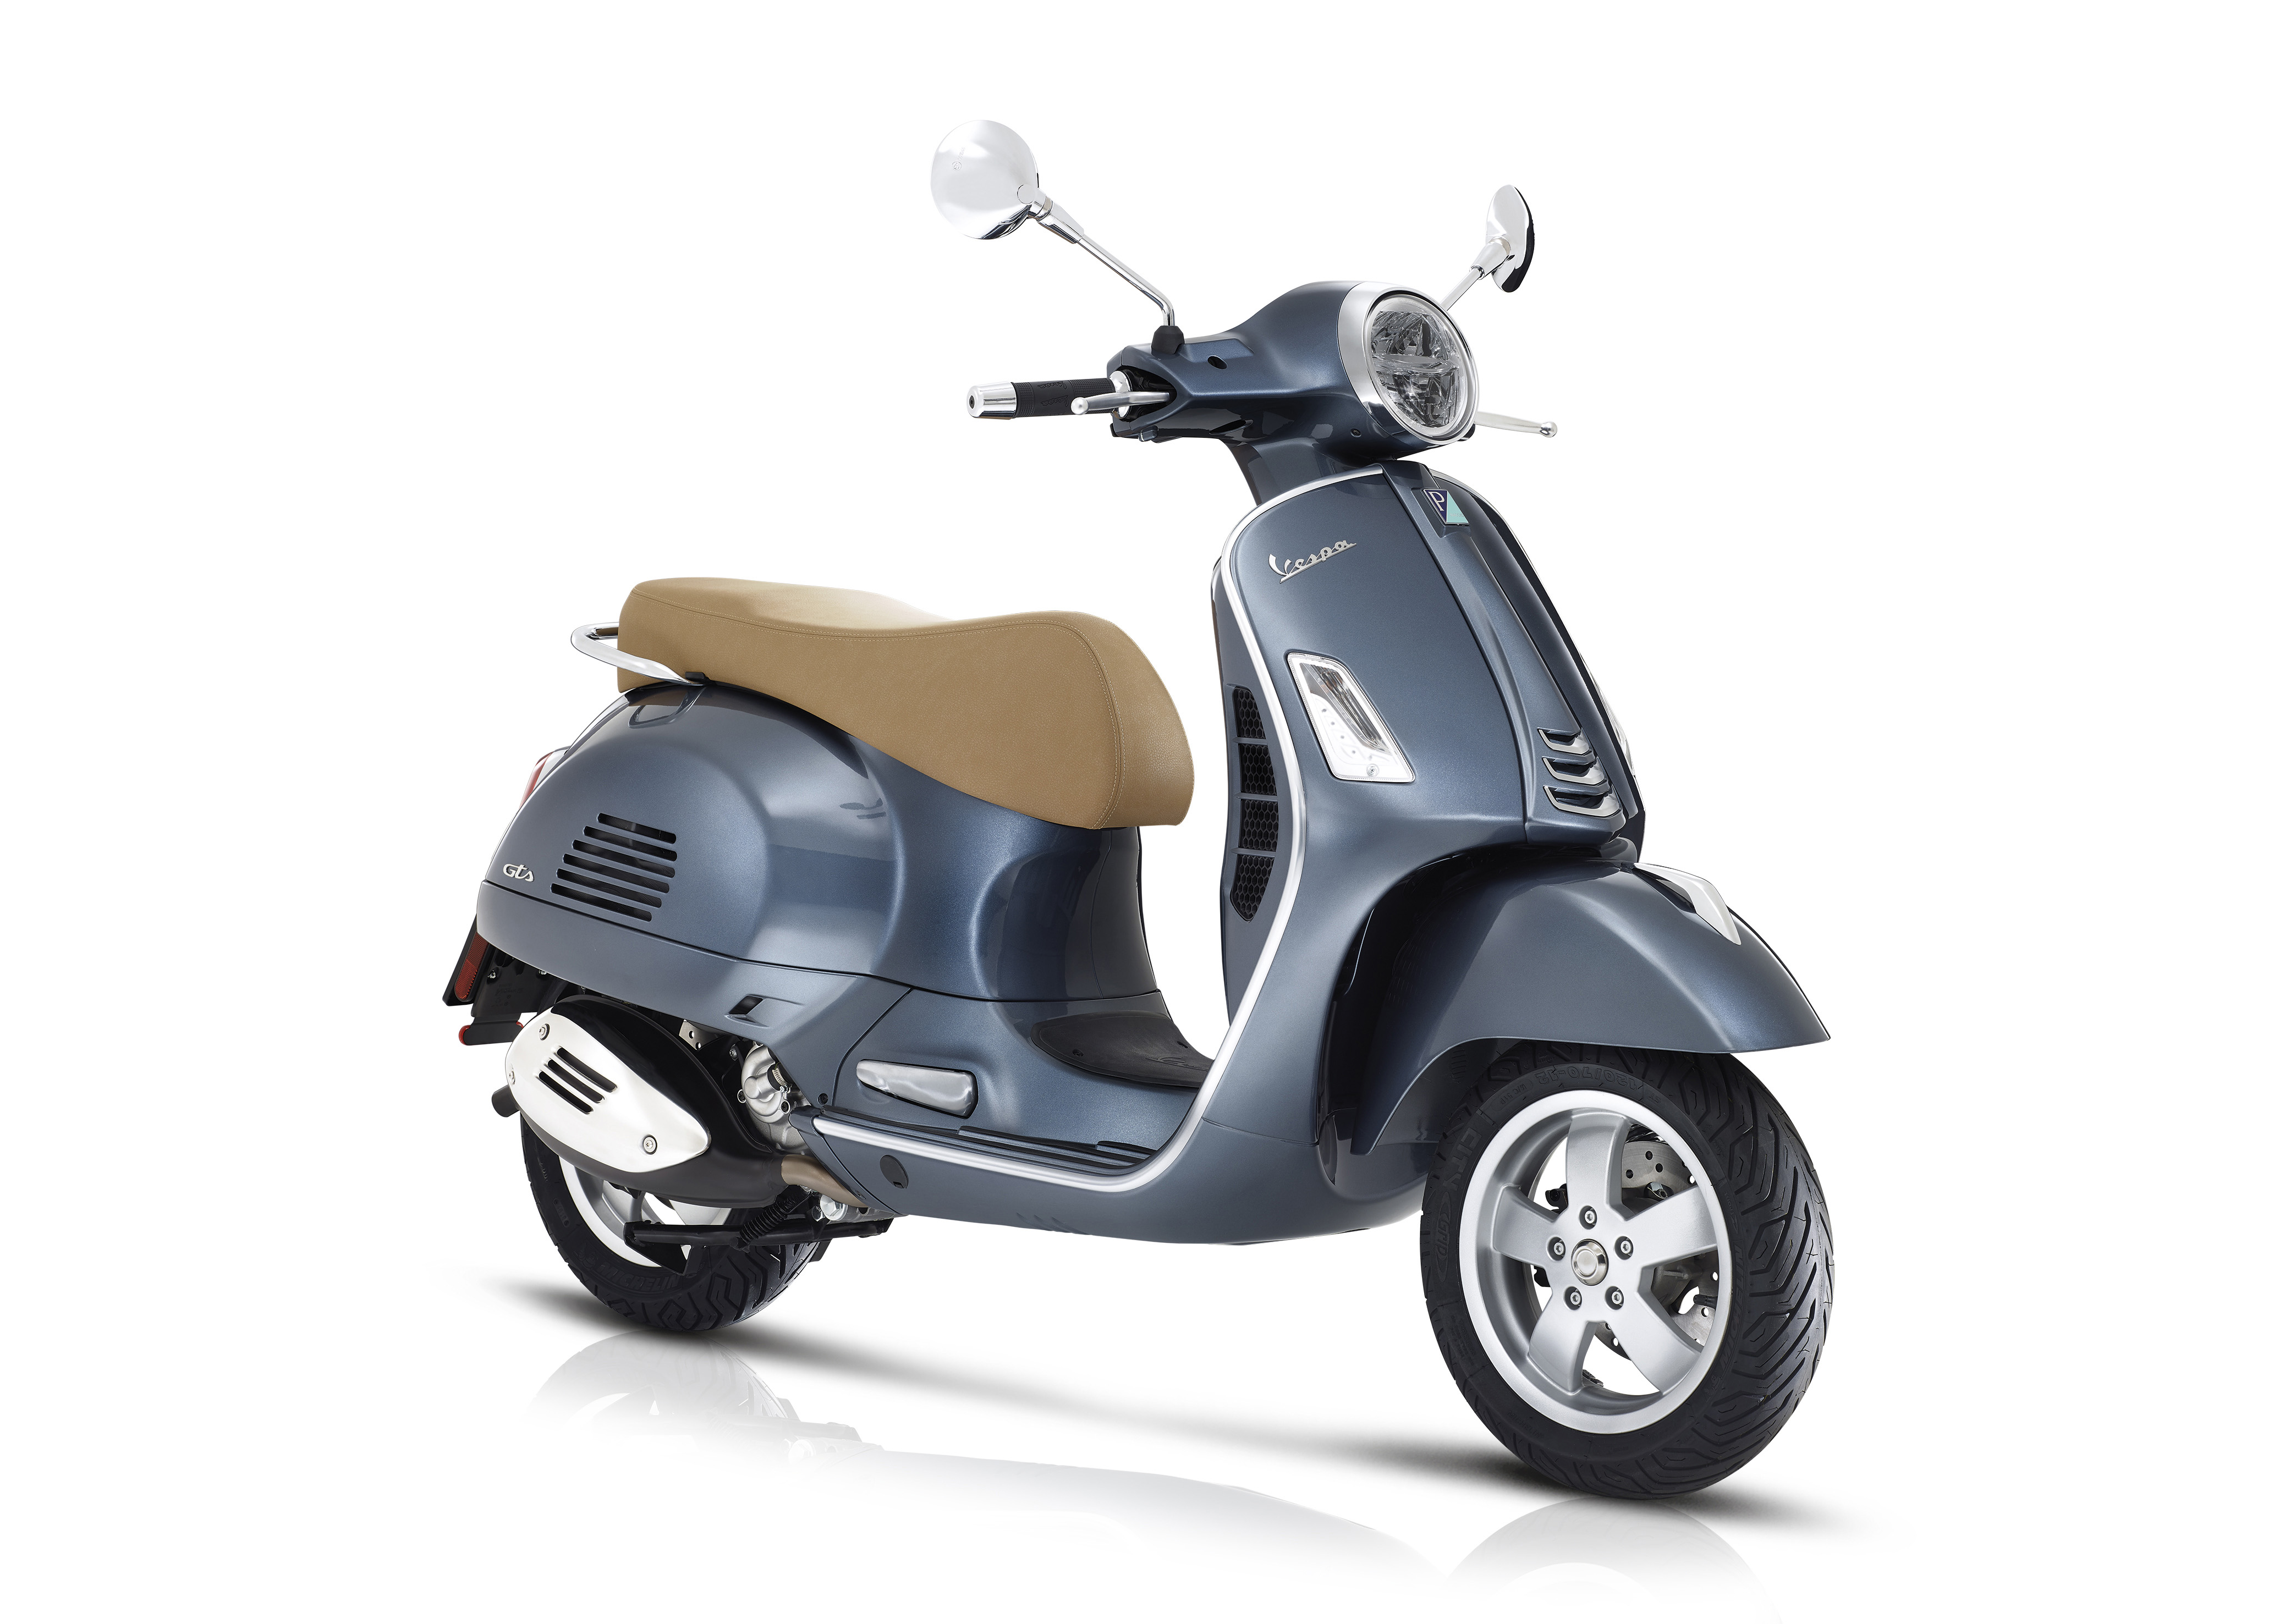 Virkelig Geografi besøg 2020 Vespa GTS 300 Buyer's Guide: Specs, Photos, Price | Cycle World